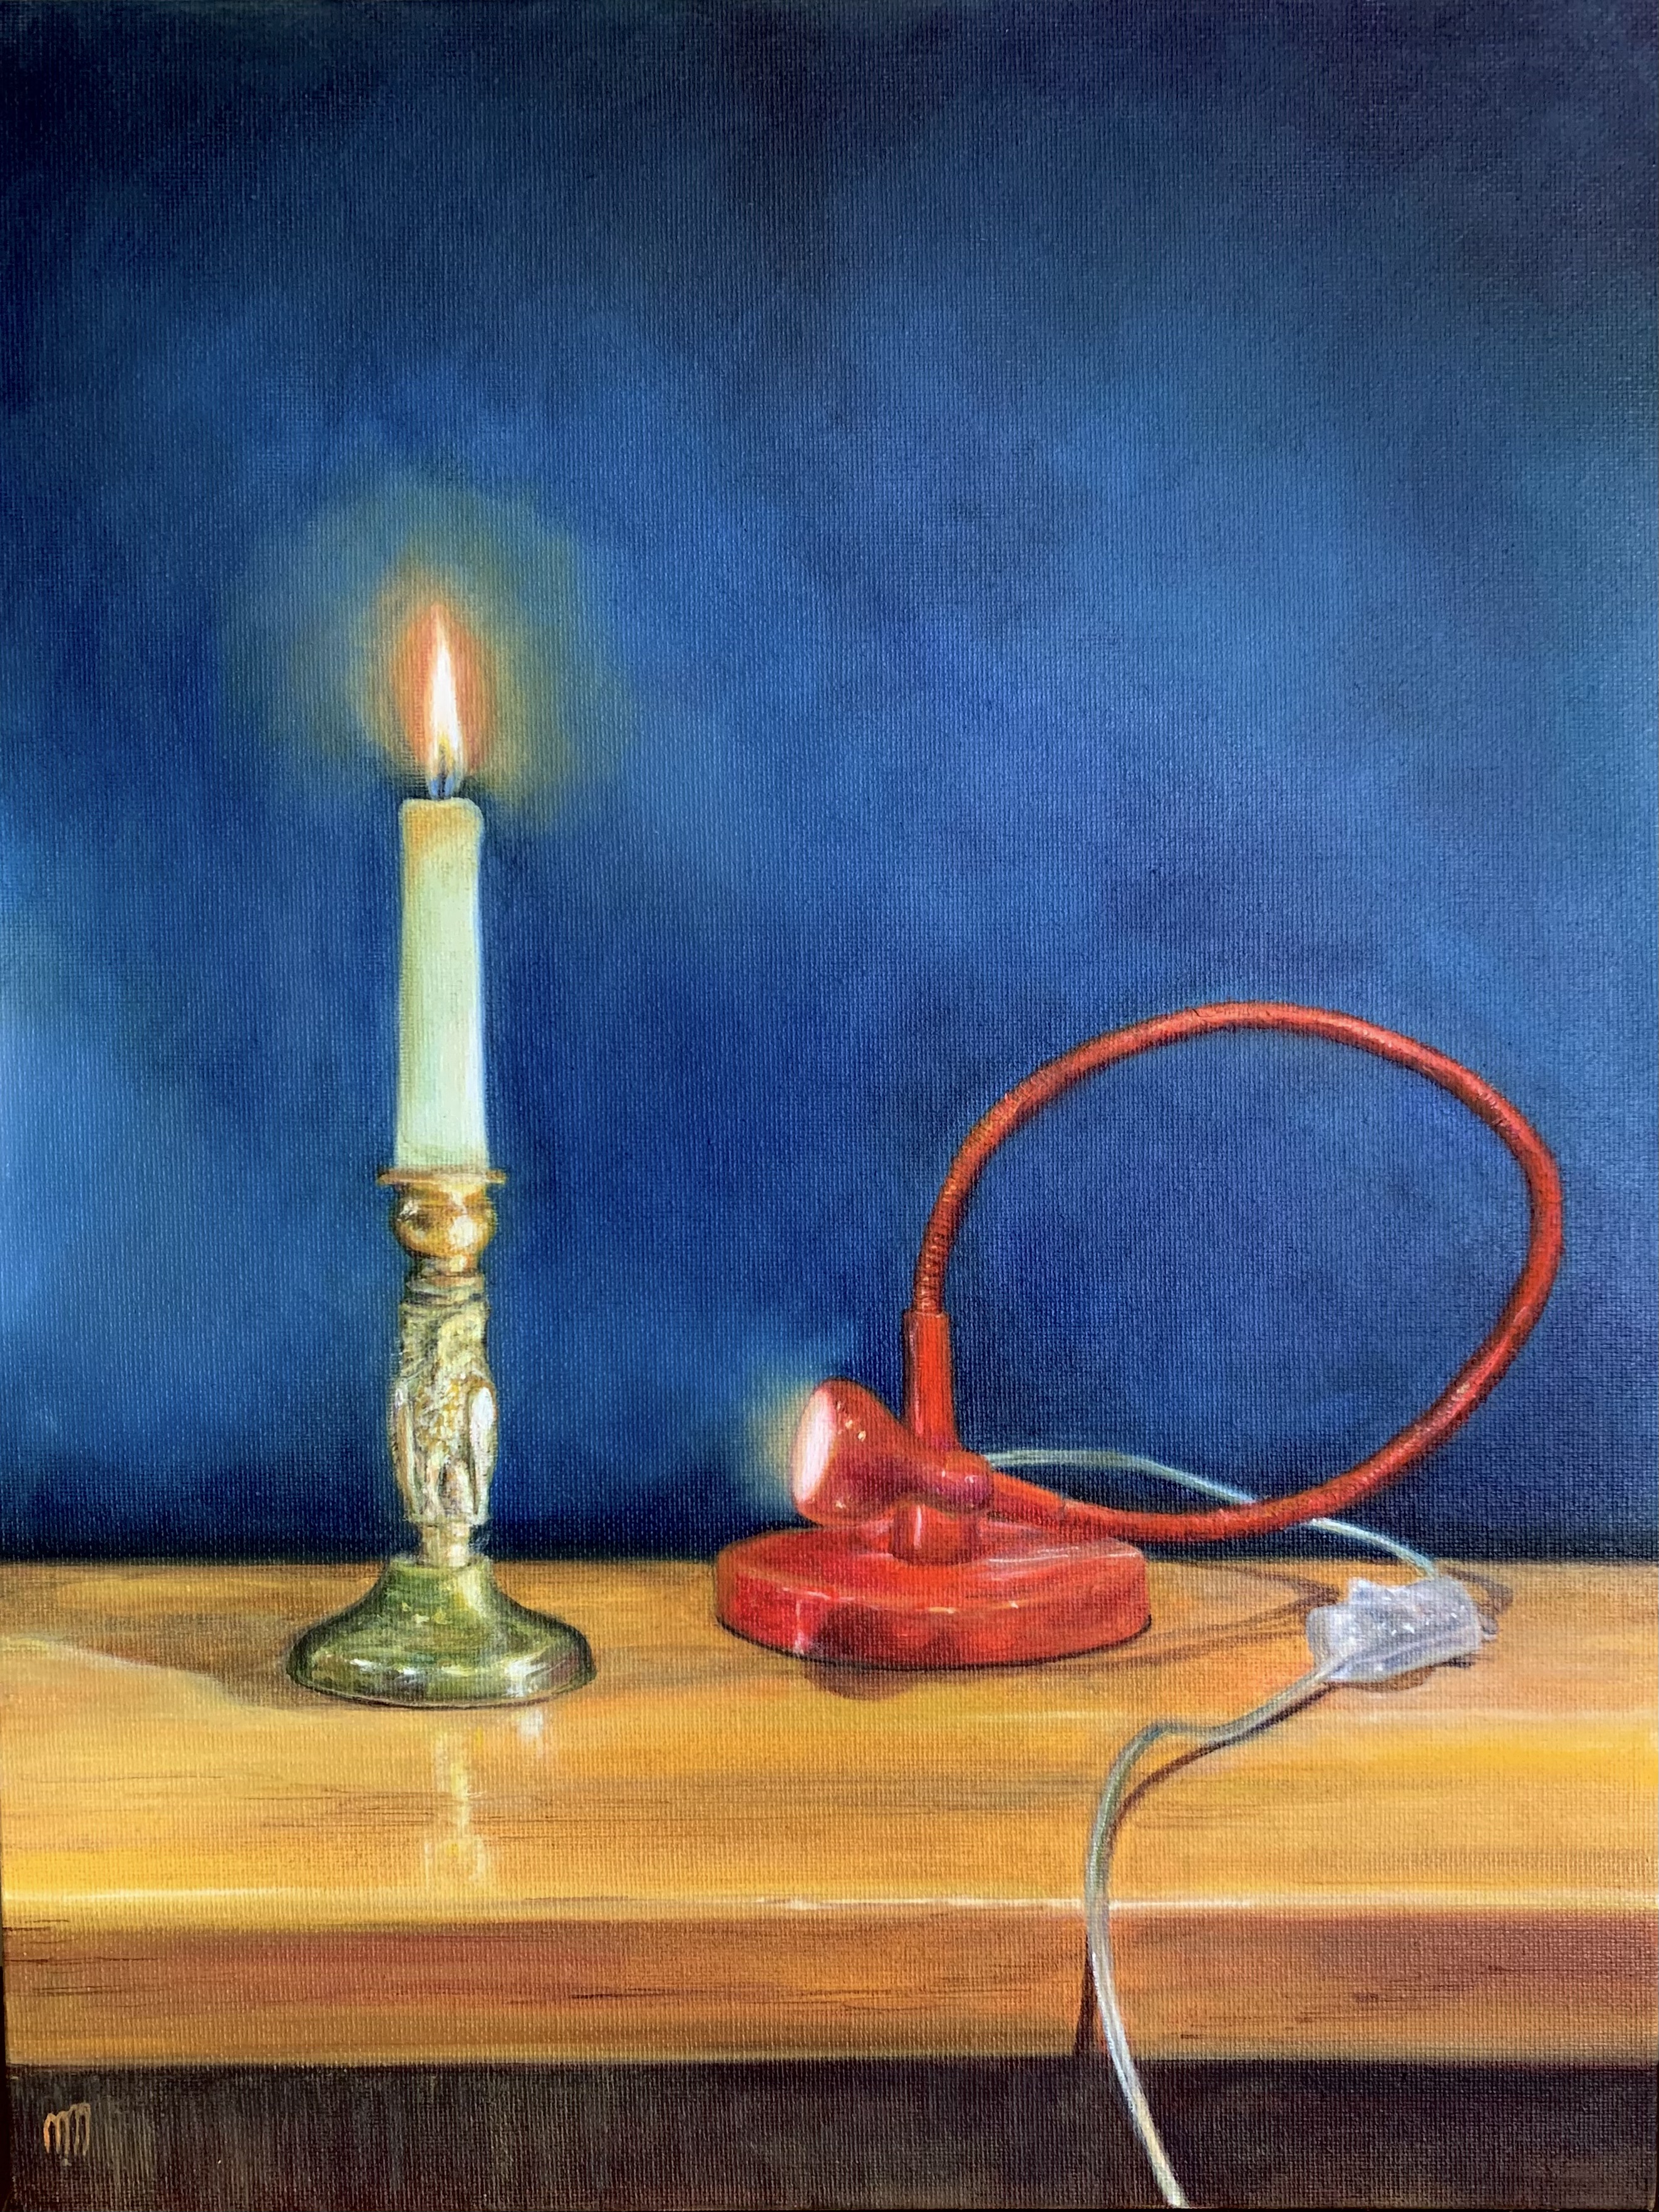 Oil on Canvas board  - 16 x 12 inches (unframed)  - €400